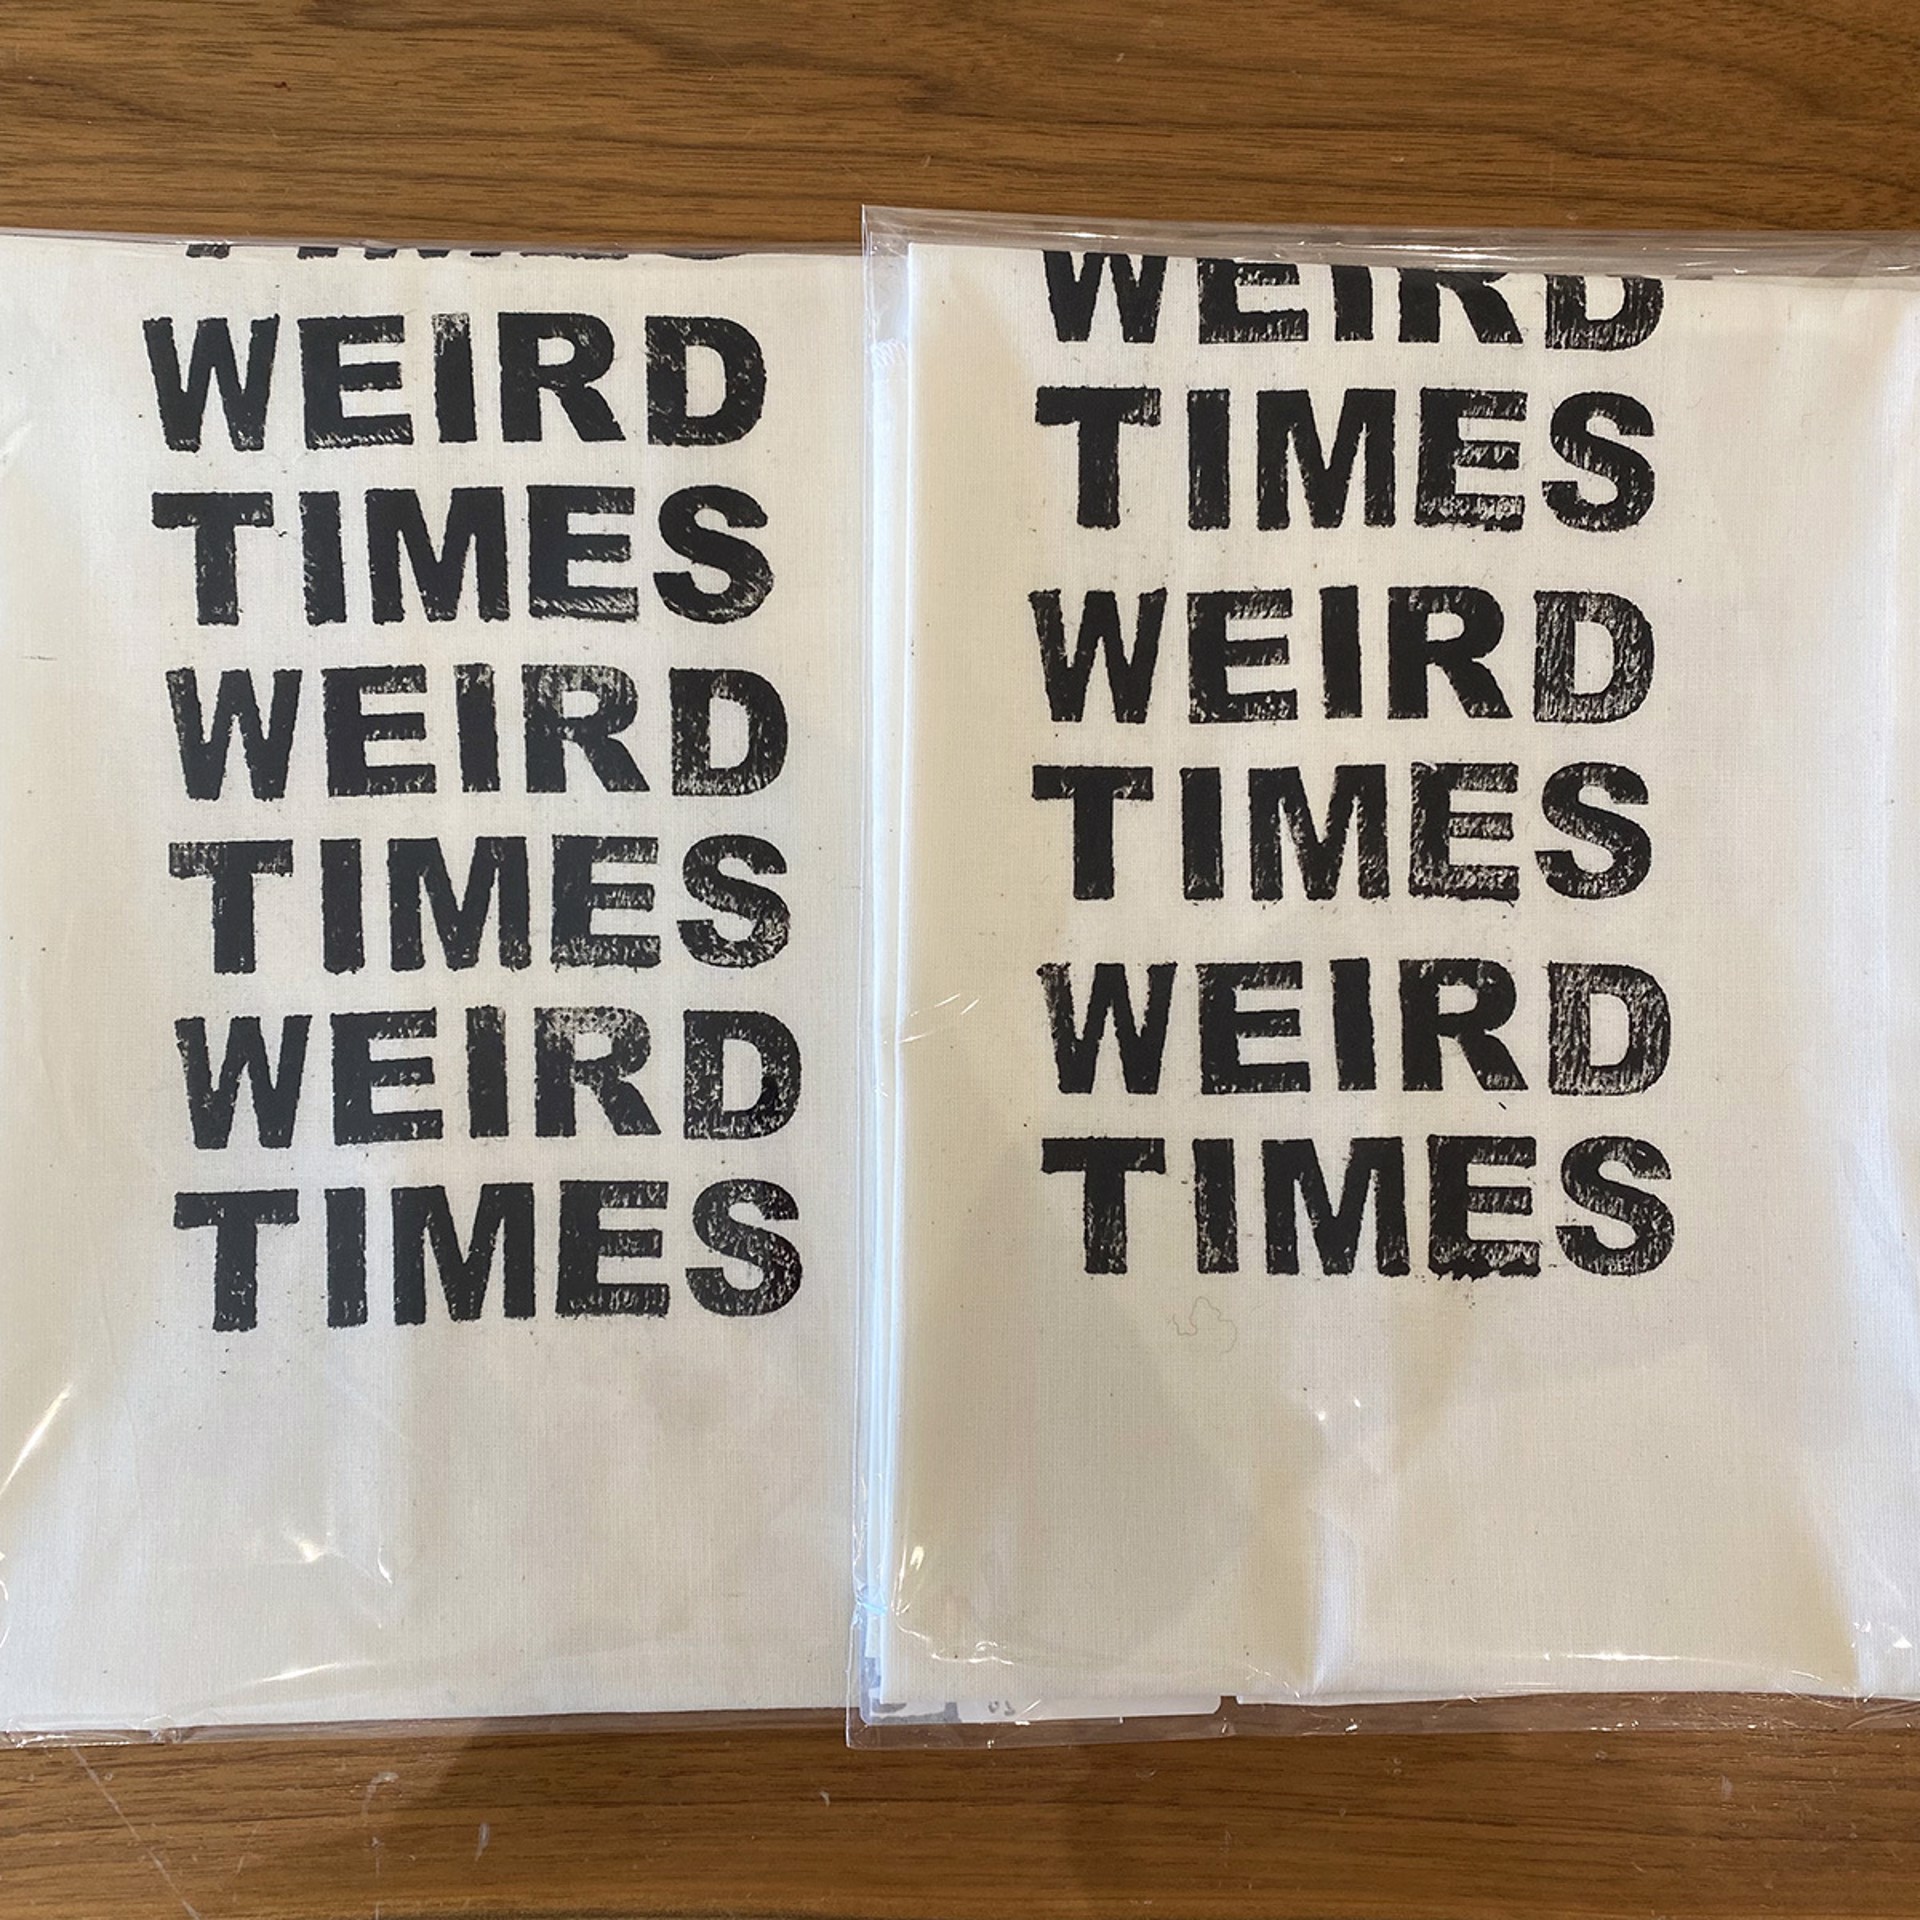 Weird Times Tea Towel, White Cotton with White Stitching by Liz Pead